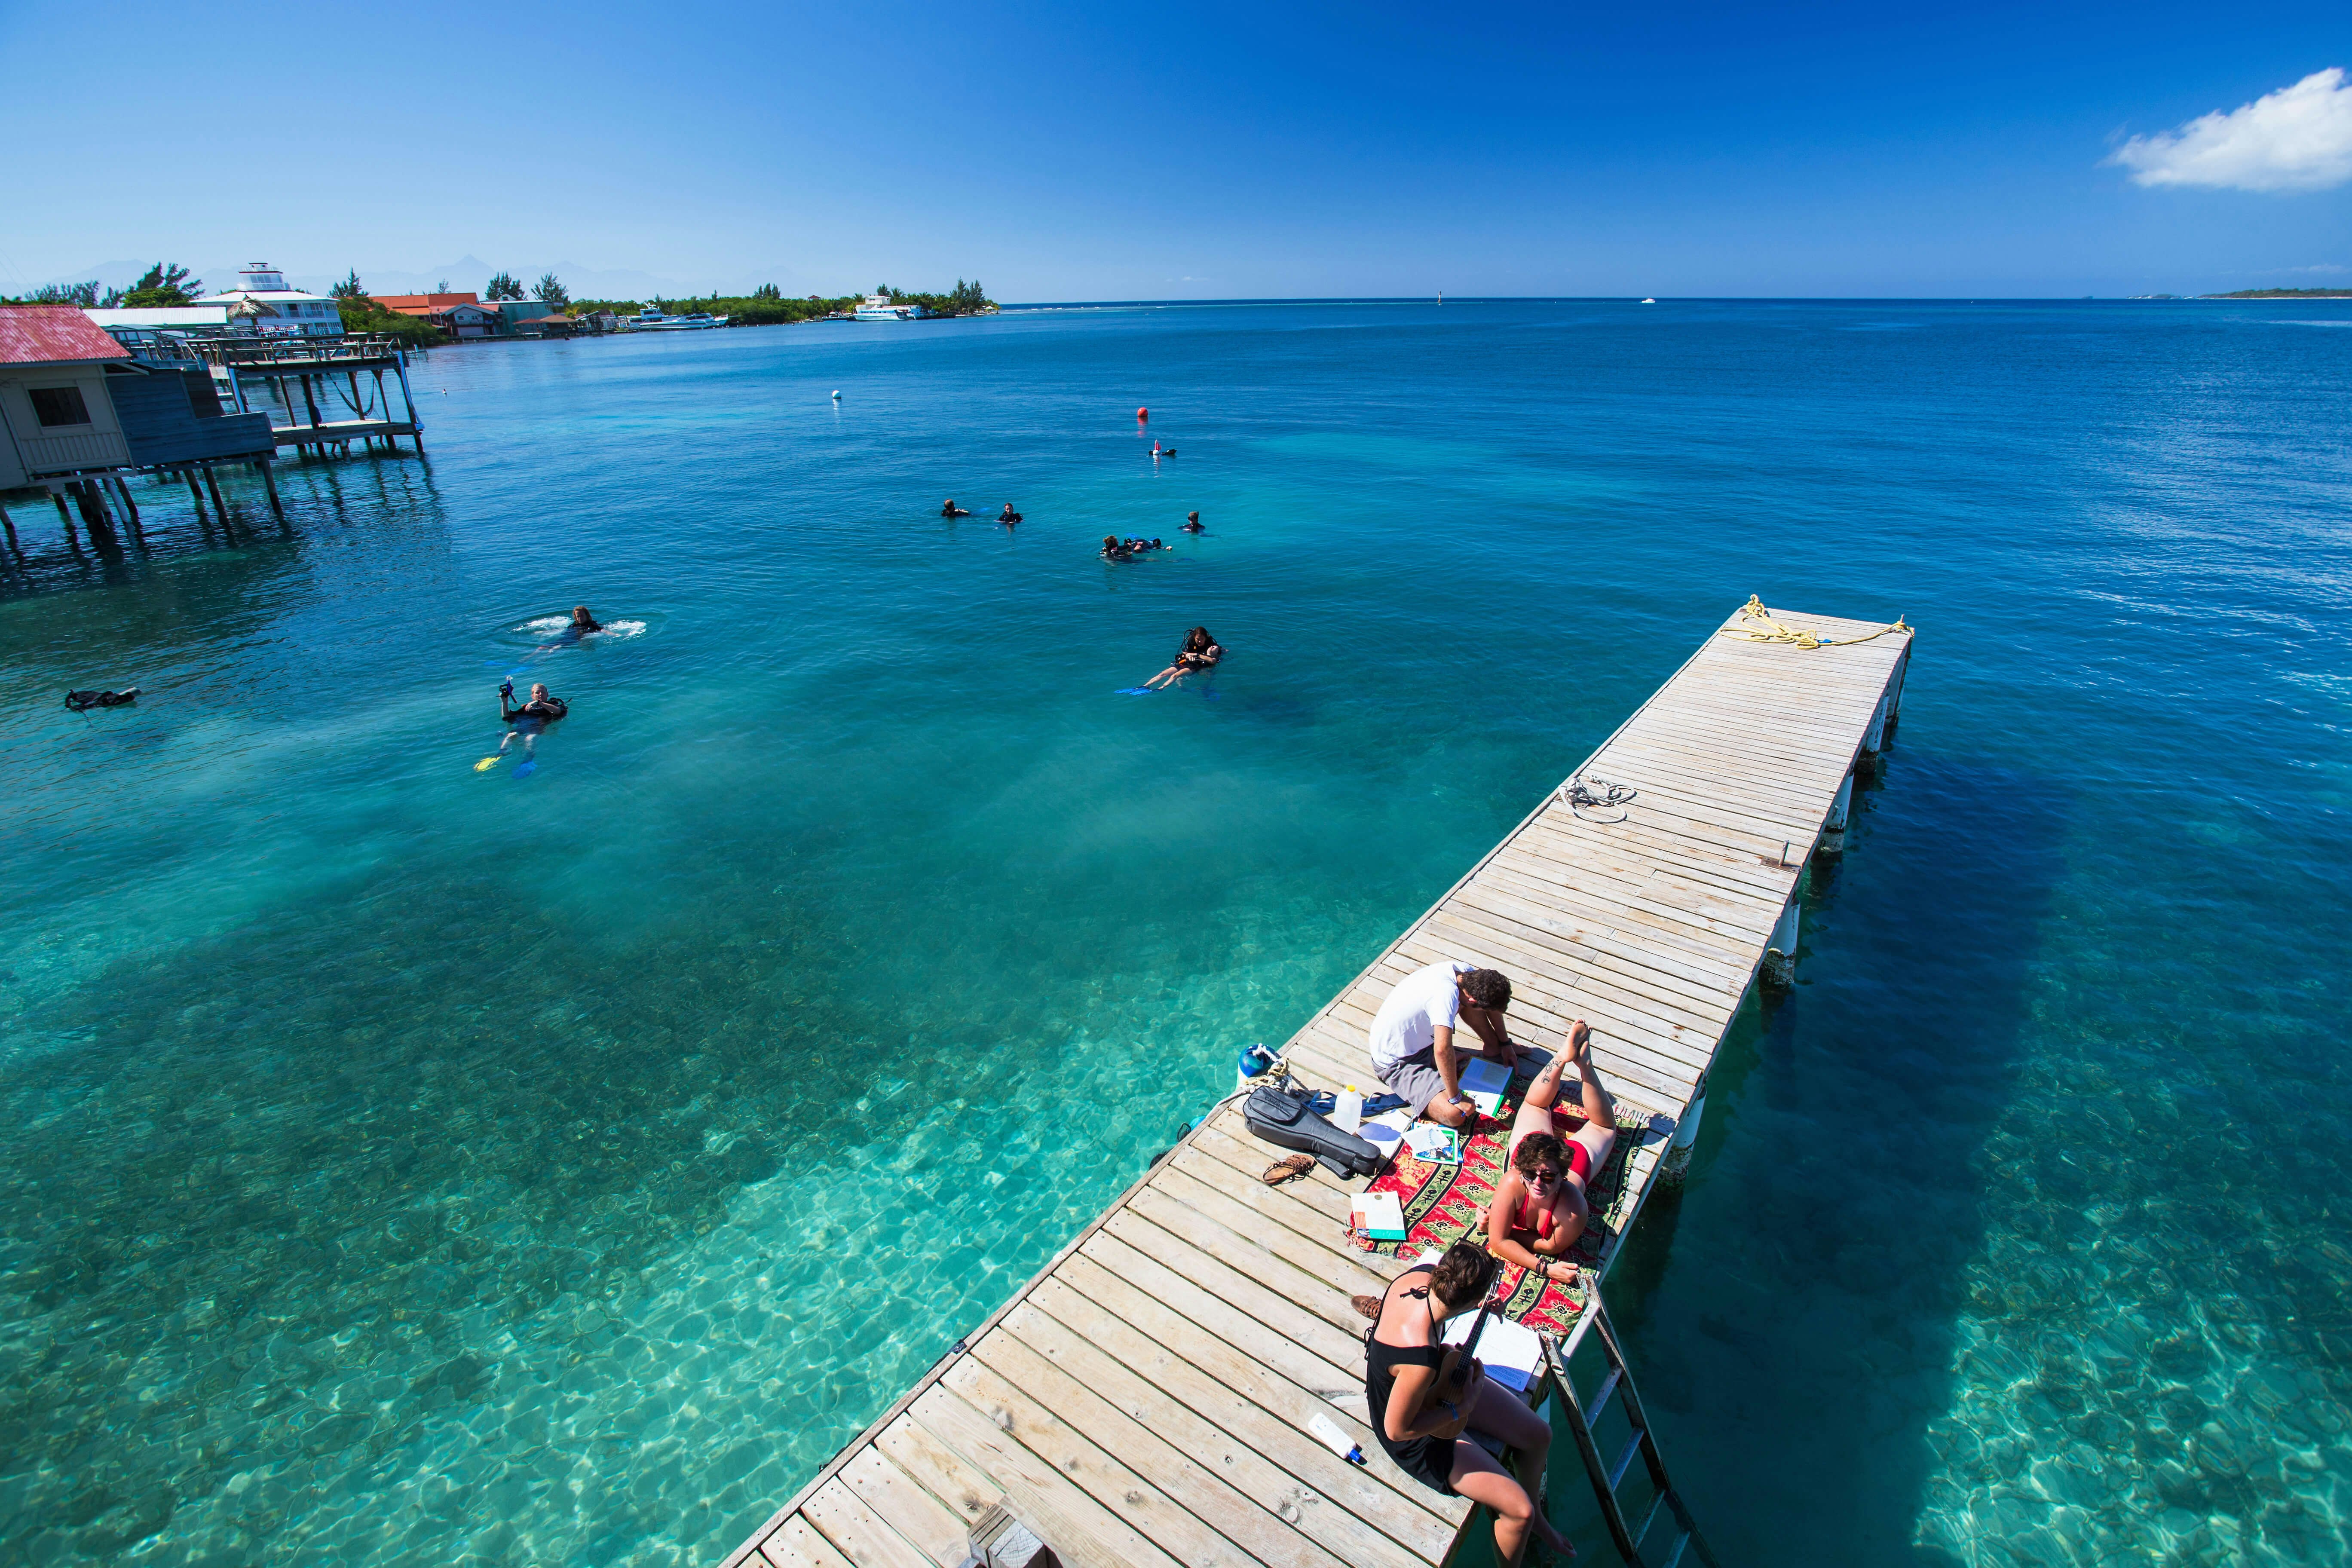 Girls sit on a Utila dock with snorkelers in the water behind them